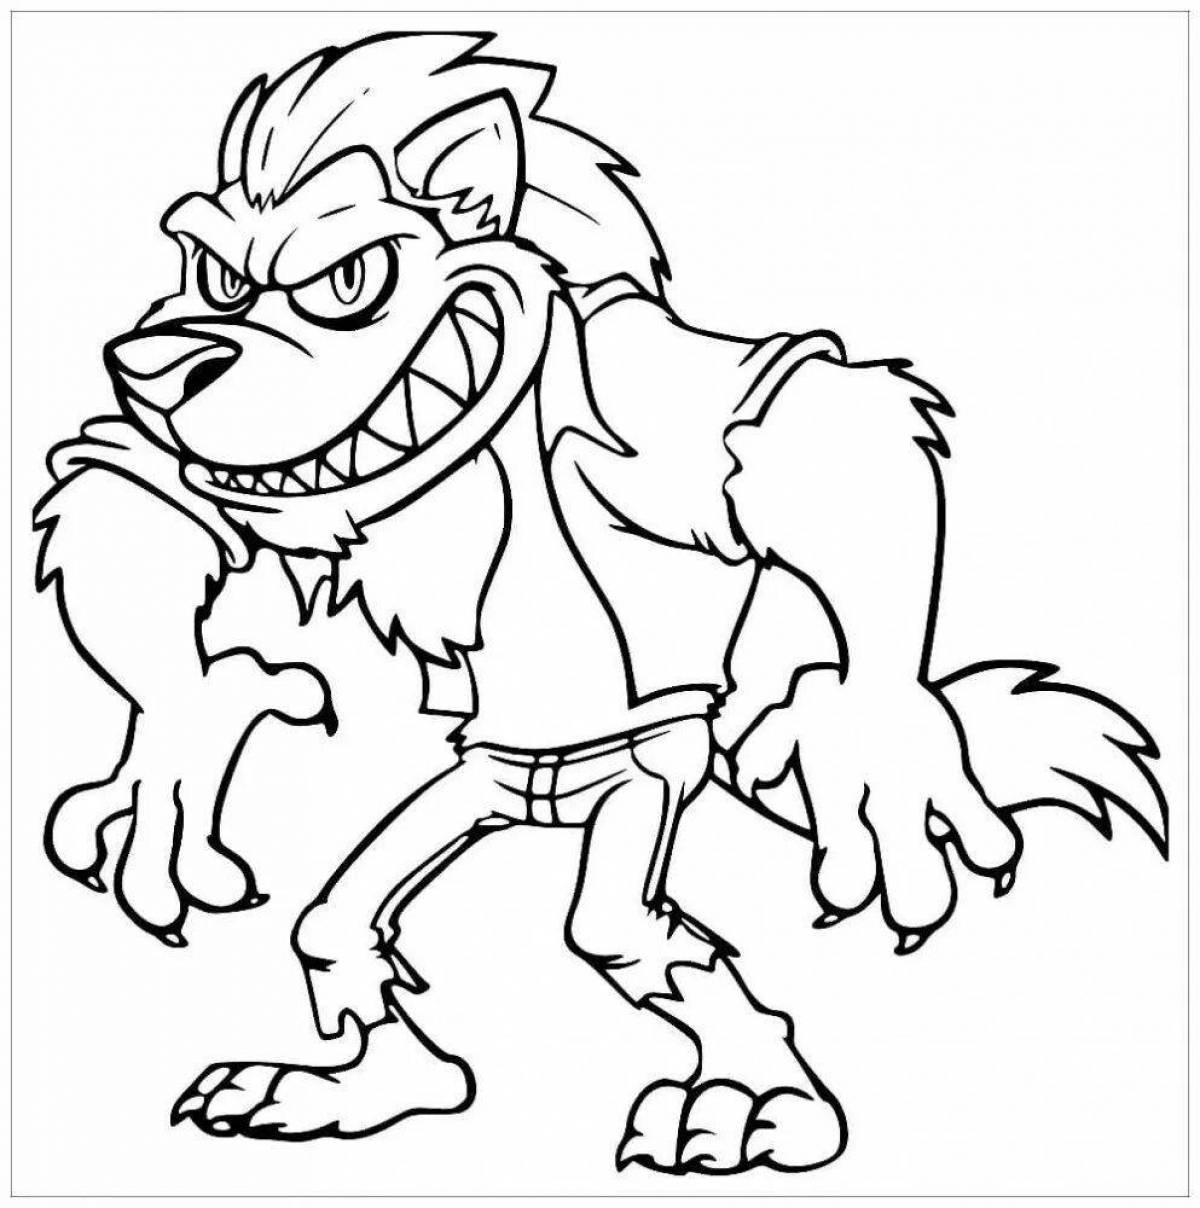 Coloring page formidable werewolf